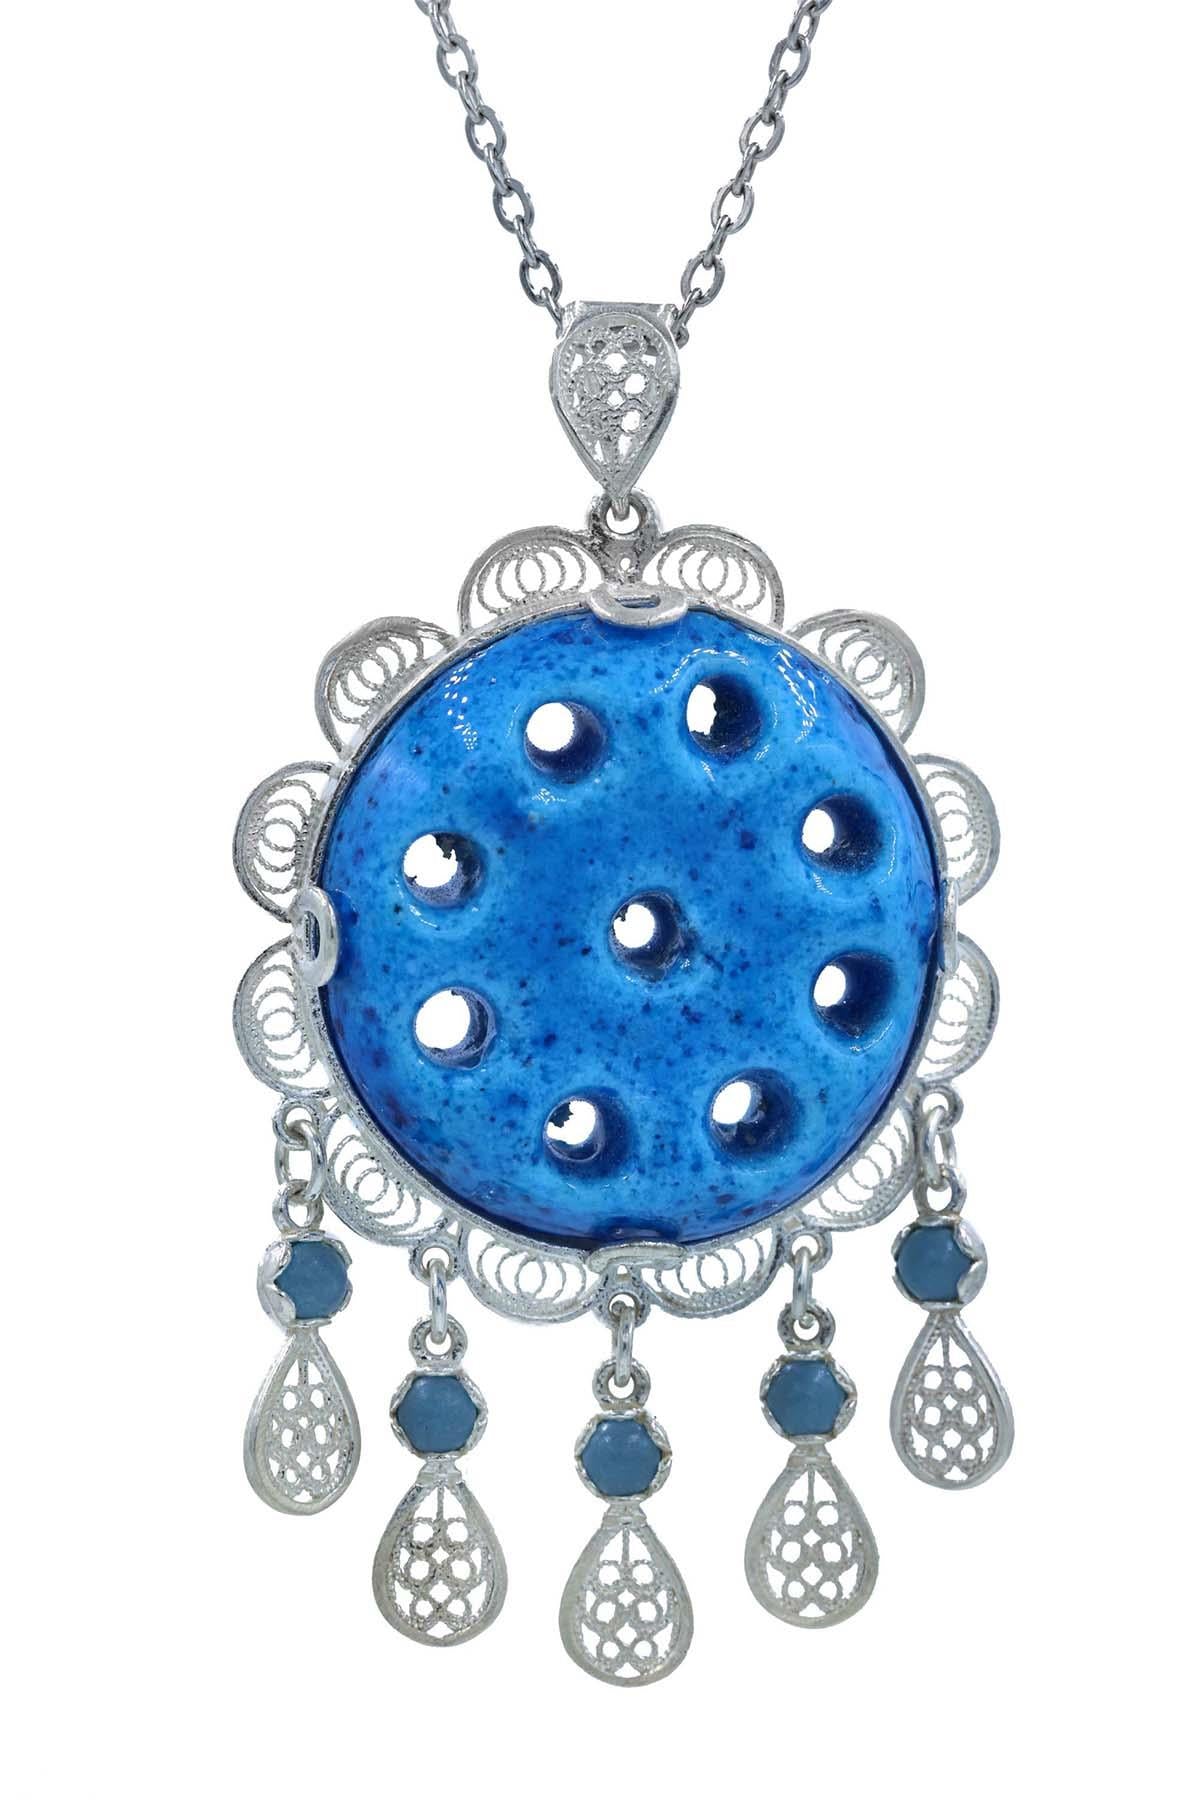 Elegance in Silver: Handcrafted 925 Sterling Silver Syriac Eye Necklace with Iranian Turquoise